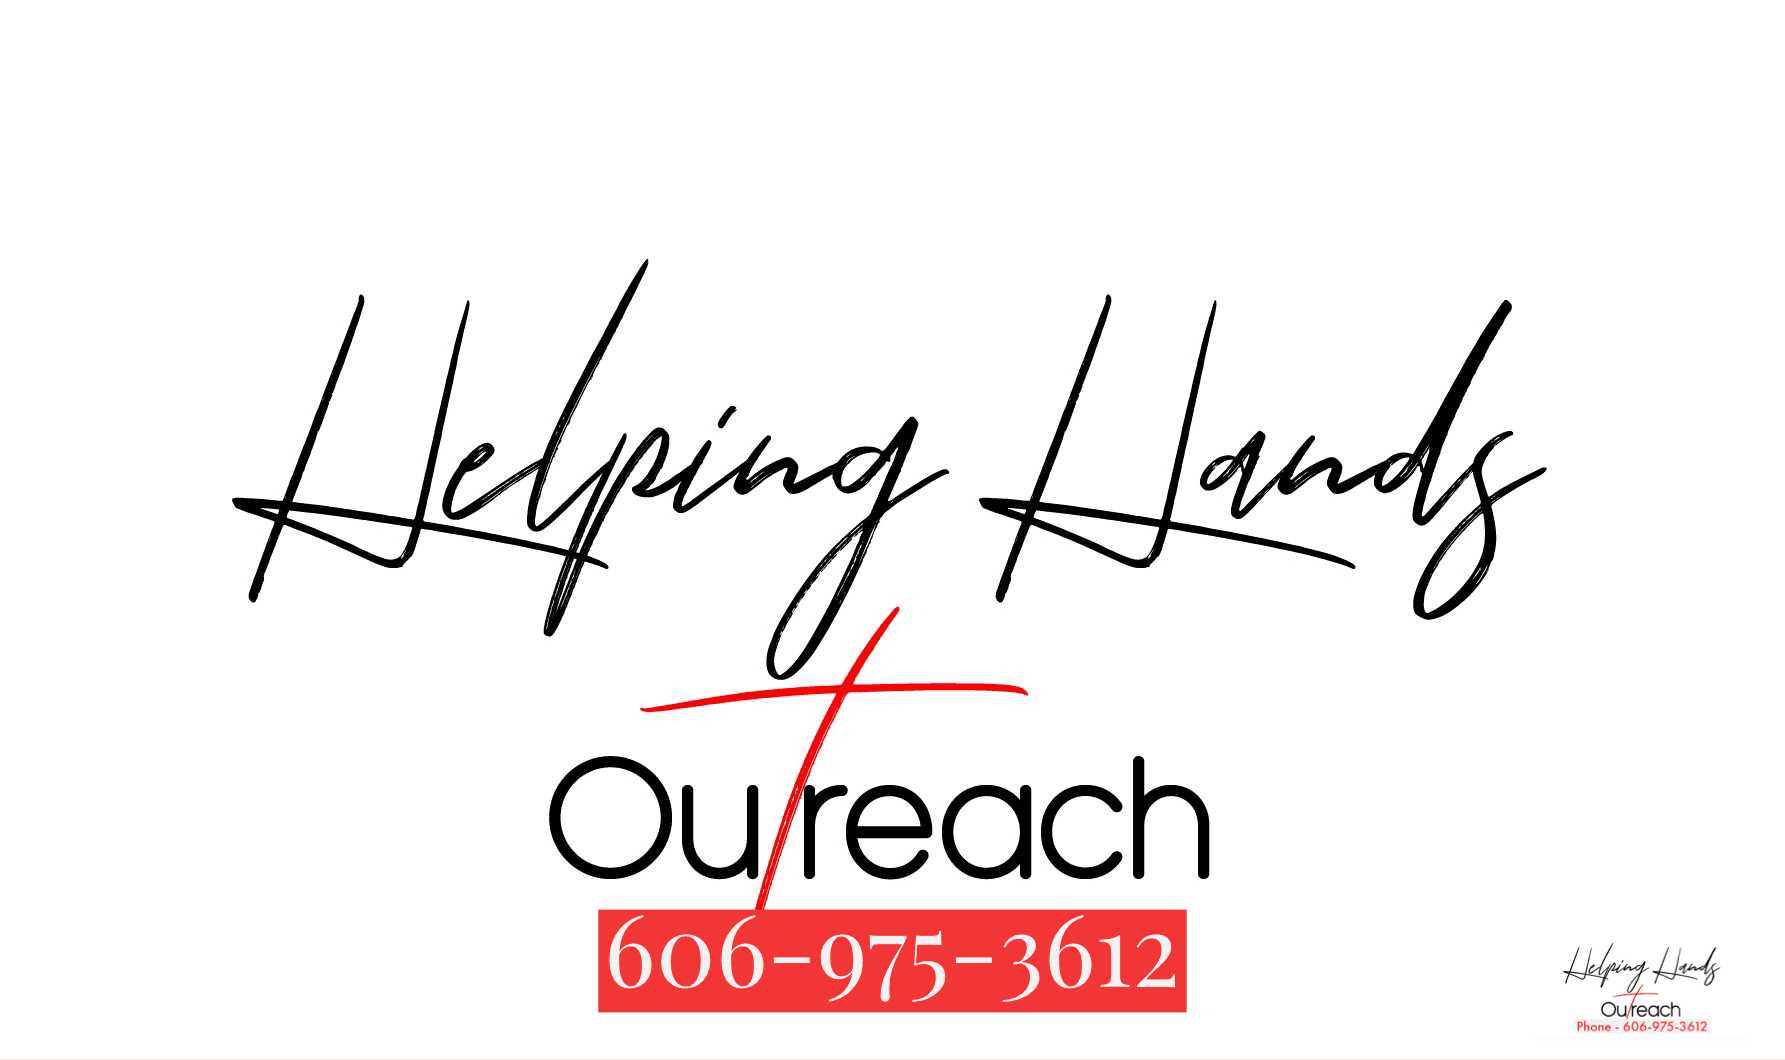 Helping Hands Angel Fund Ministry